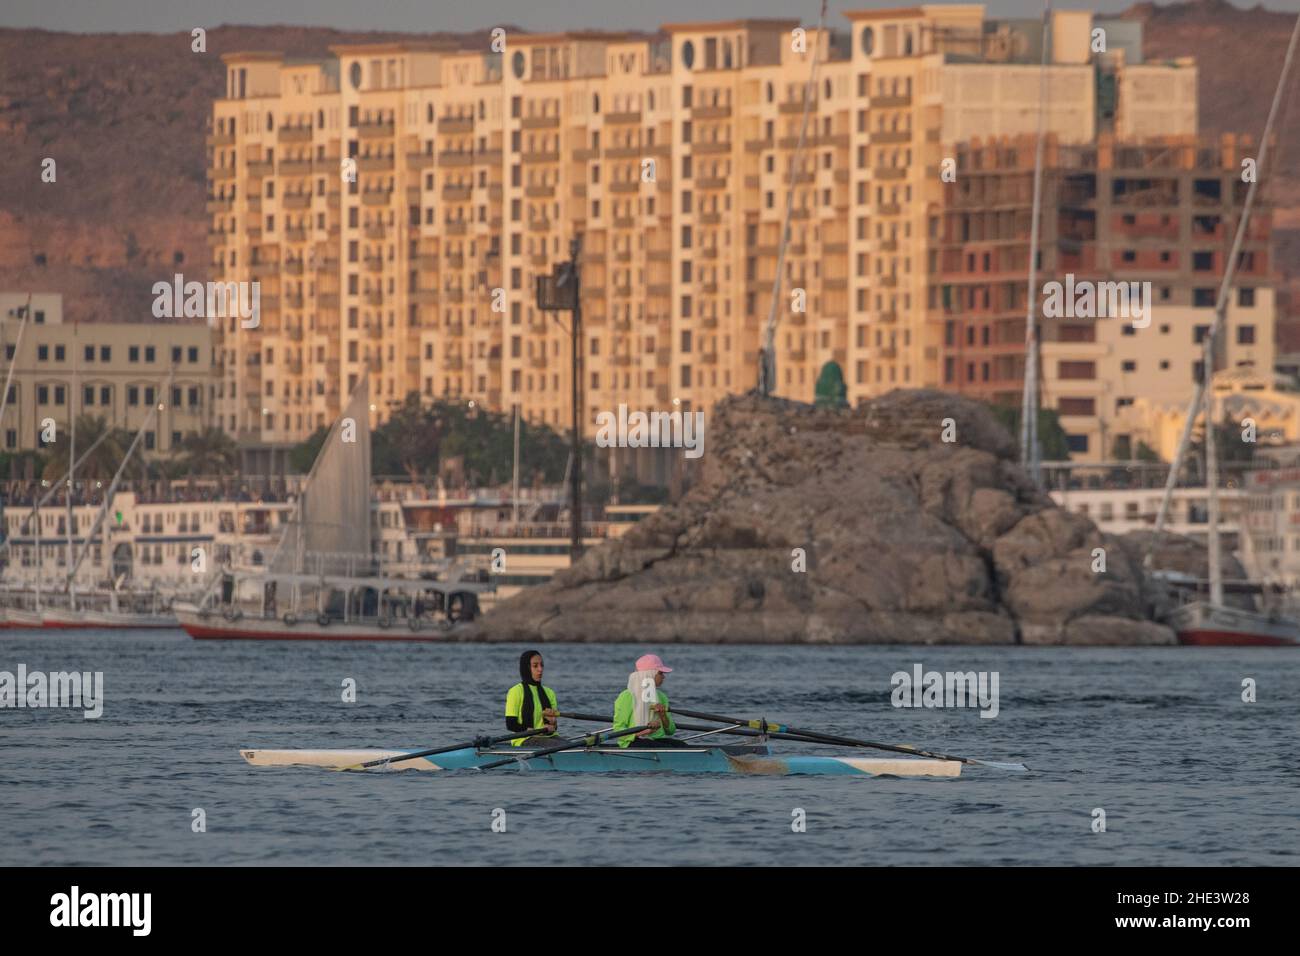 Female rowers training in a double scull on the Nile river in Aswan, Egypt. Stock Photo